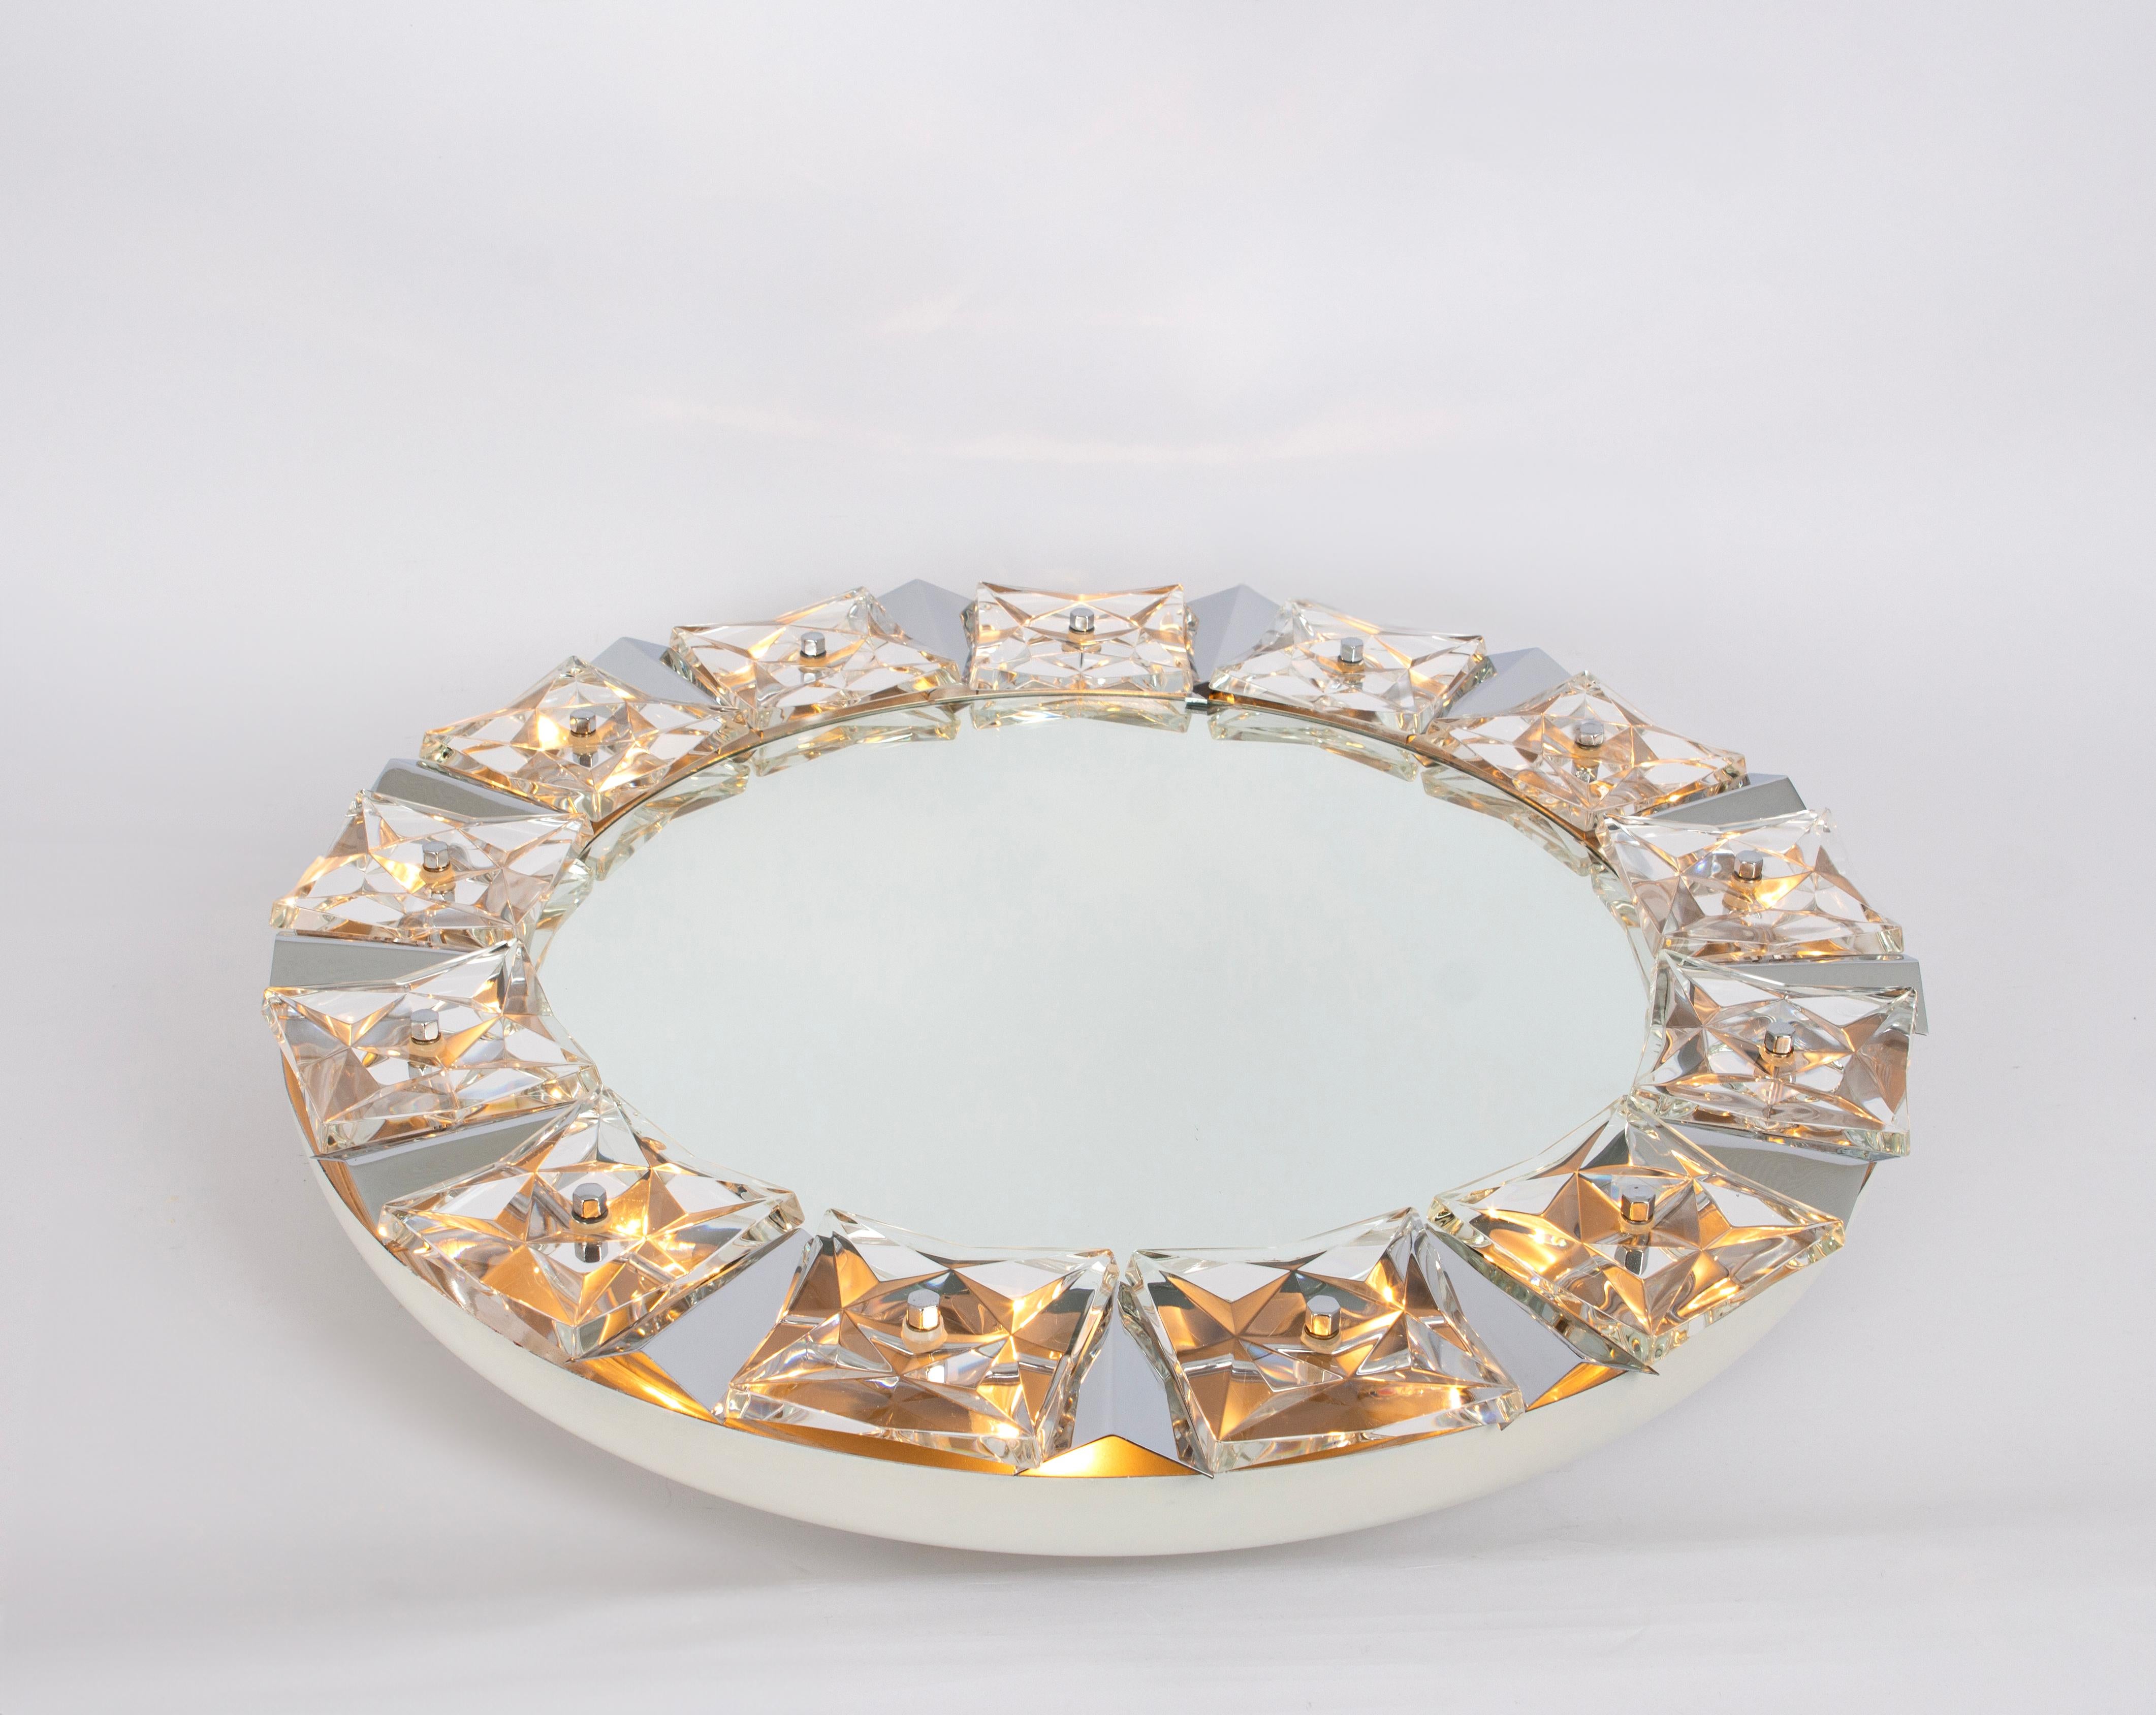 A wonderful and high quality wall mirror by Kinkeldey, Germany, 1970s
It is made of a chrome frame decorated with cut crystal glass. 

High quality and in very good condition. Cleaned, well-wired, and ready to use. 
The mirror can be illuminated and